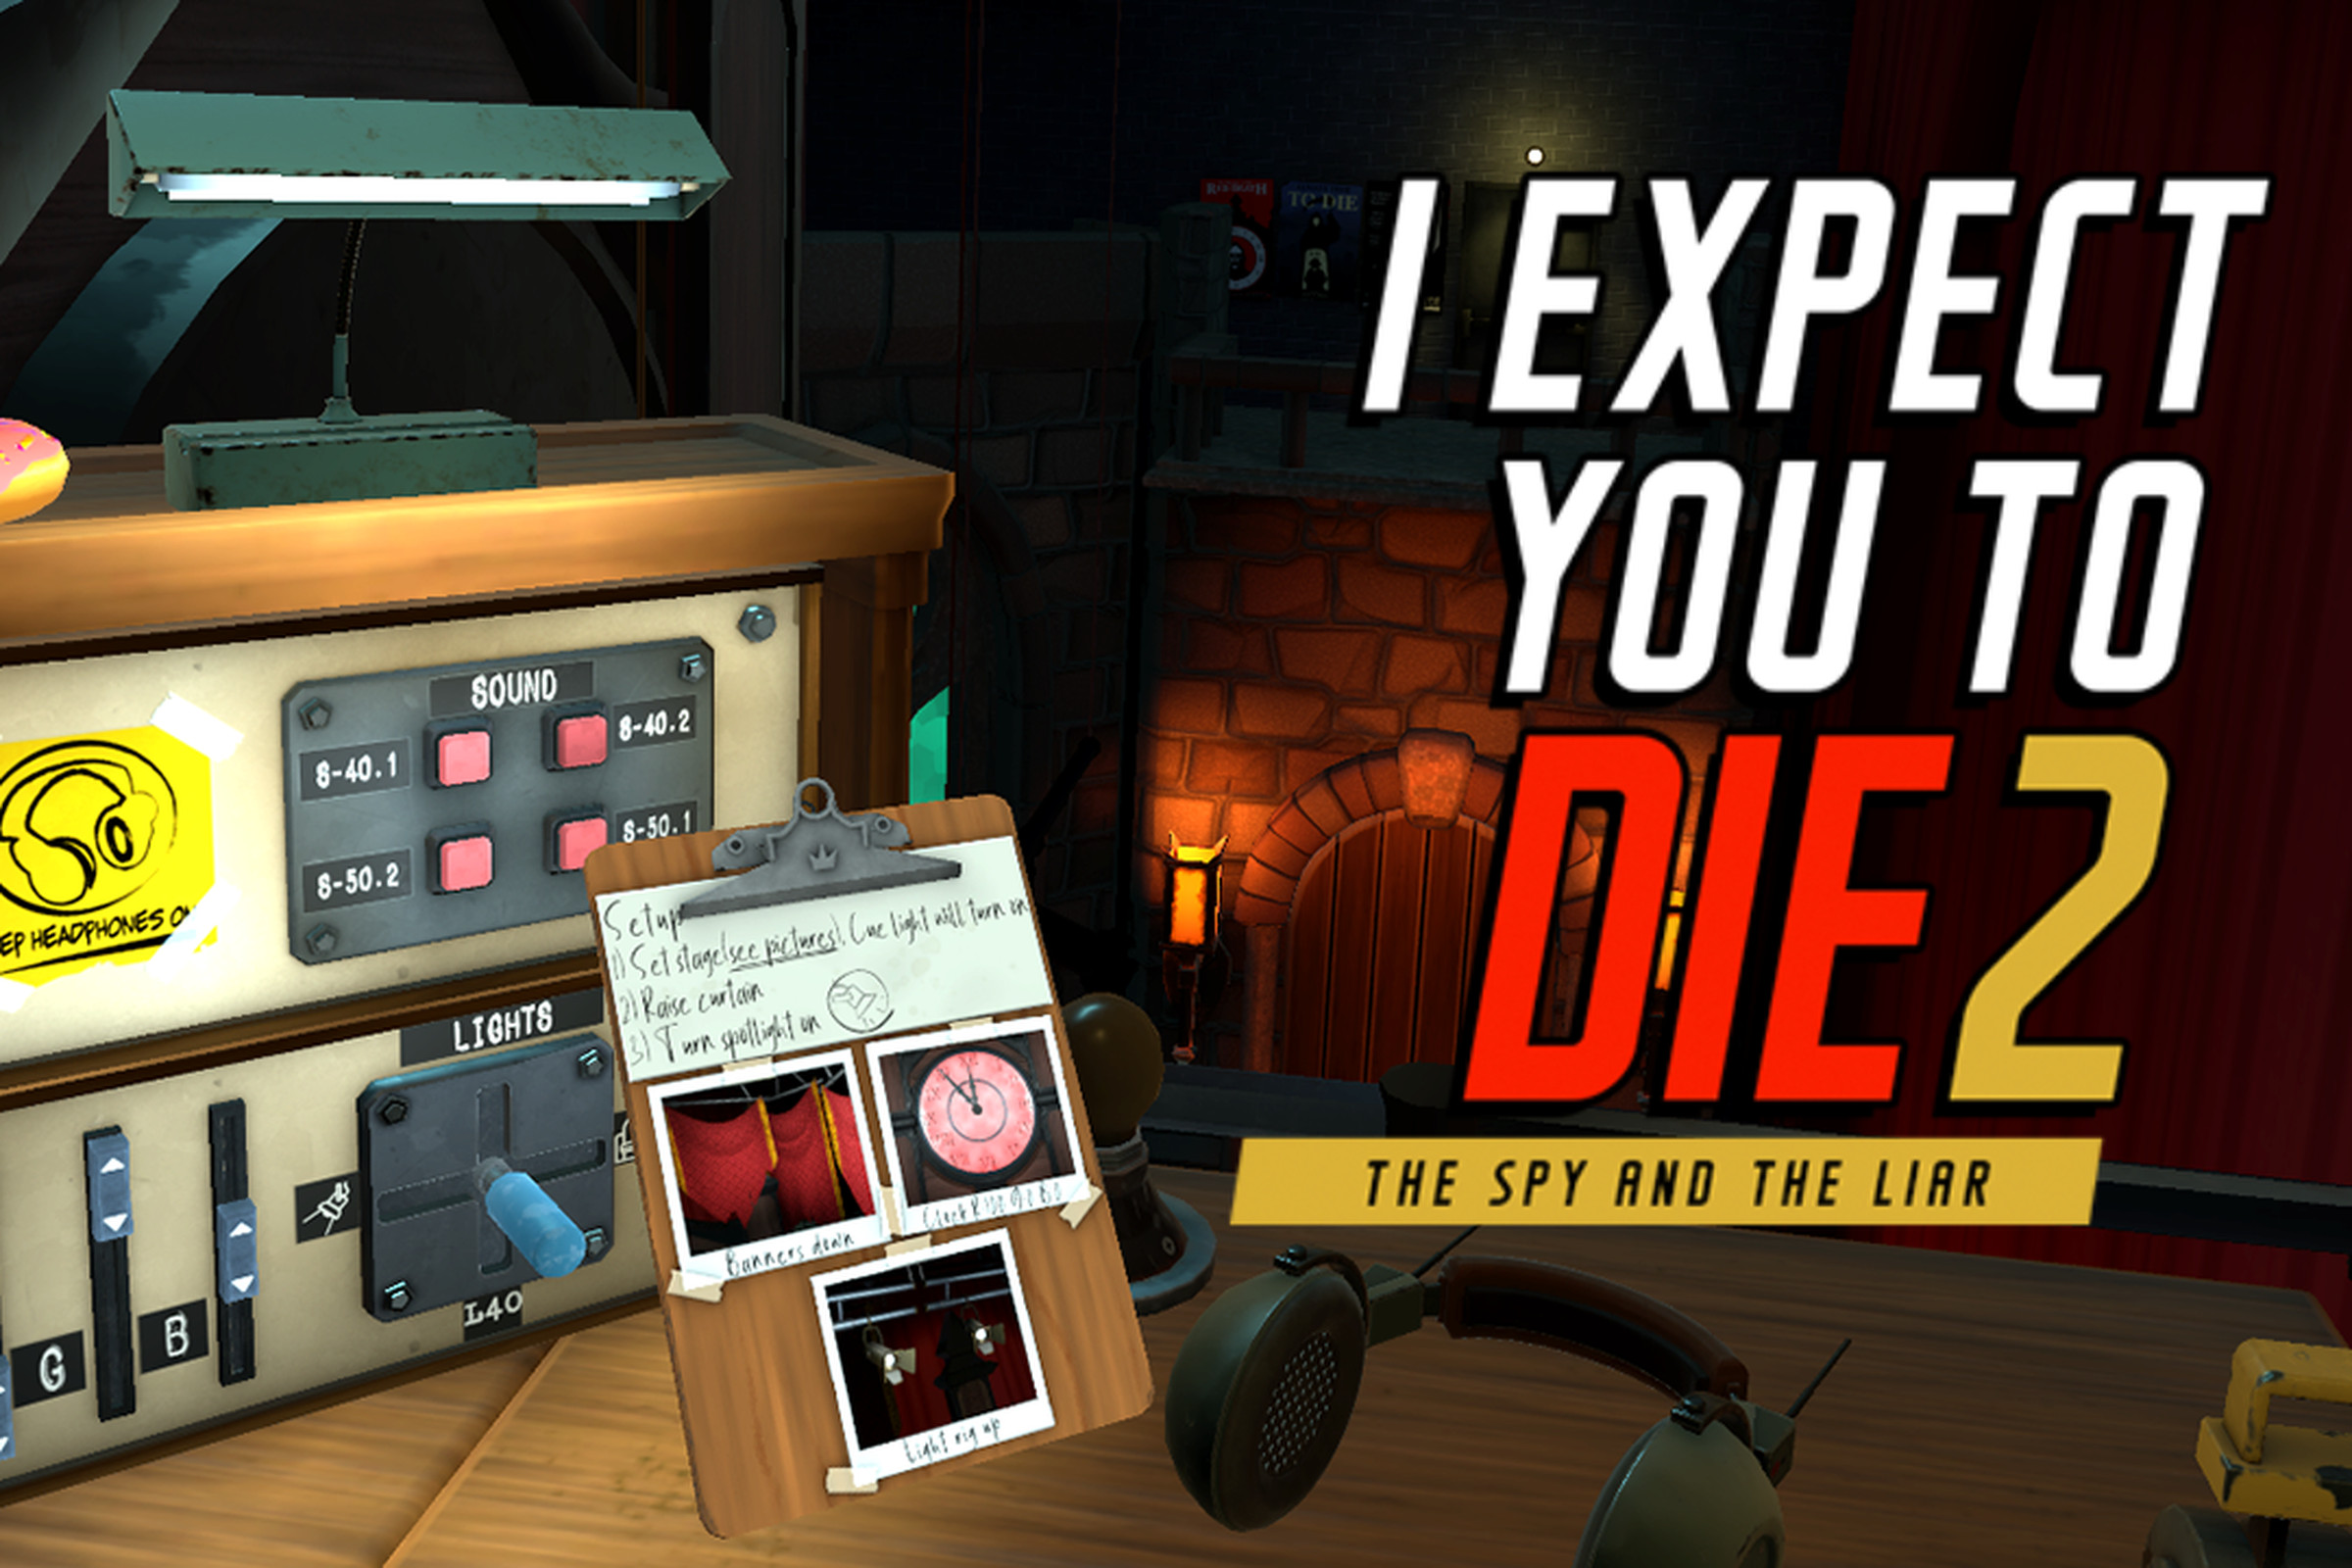 I Expect You To Die 2 logo over a gameplay image